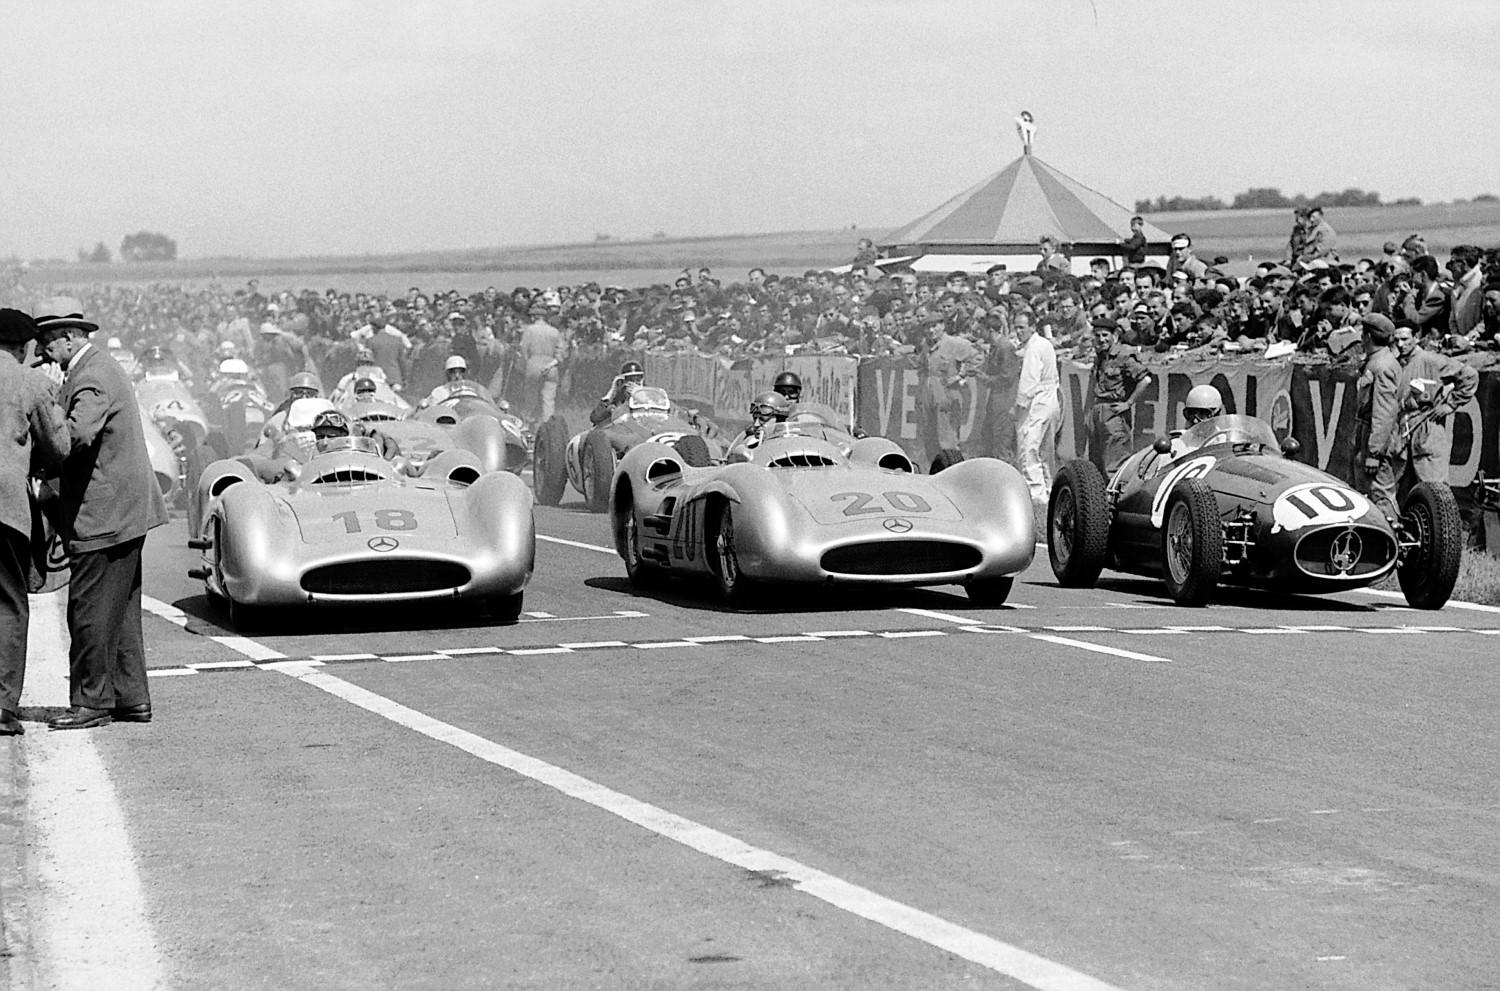 Double victory in the French Grand Prix in Reims, July 4, 1954. Lining up in the first row before the start: Juan Manuel Fangio (start number 18), the winner of the race, Karl Kling (start number 20) who finished in second place, both driving Mercedes-Benz W 196 R Formula One racing cars, and Alberto Ascari (start number 10) at the wheel of a Maserati 250 F.